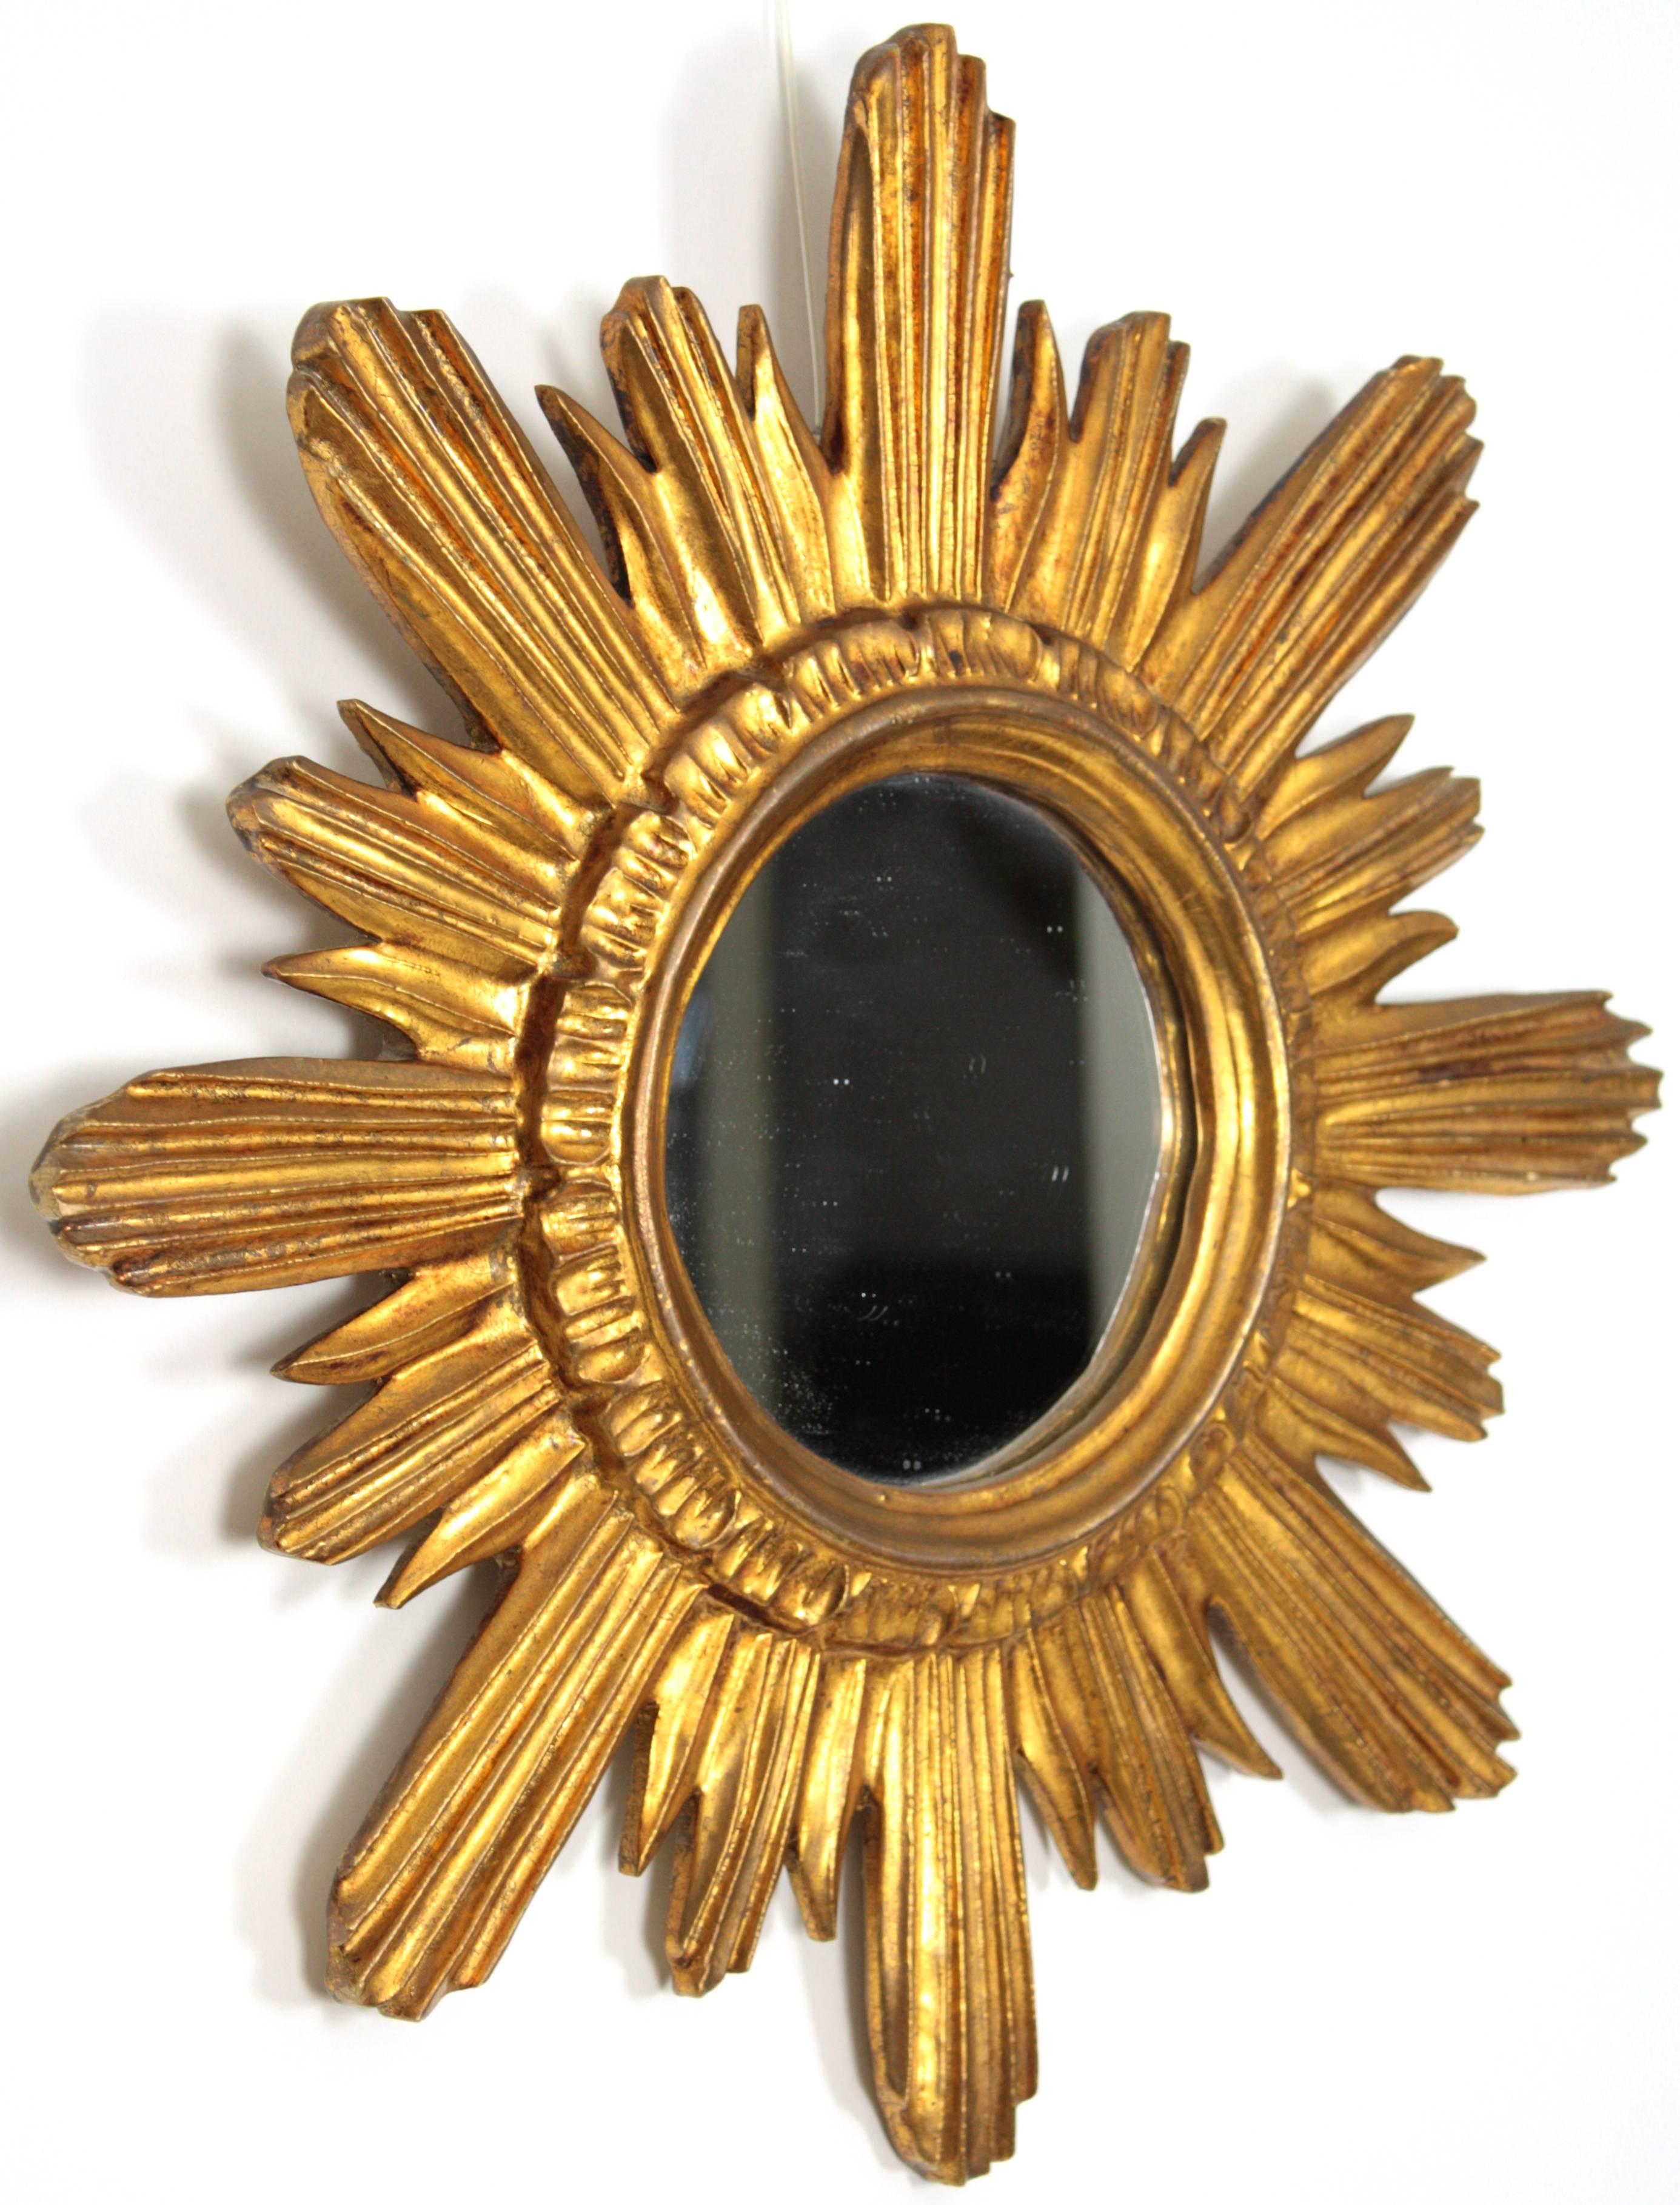 Amazing 1960s spanish gilt resin and wood sunburst mirror. Highly decorative piece that is in excellent vintage condition and it has a gorgeous original patina, Spain, circa 1960.